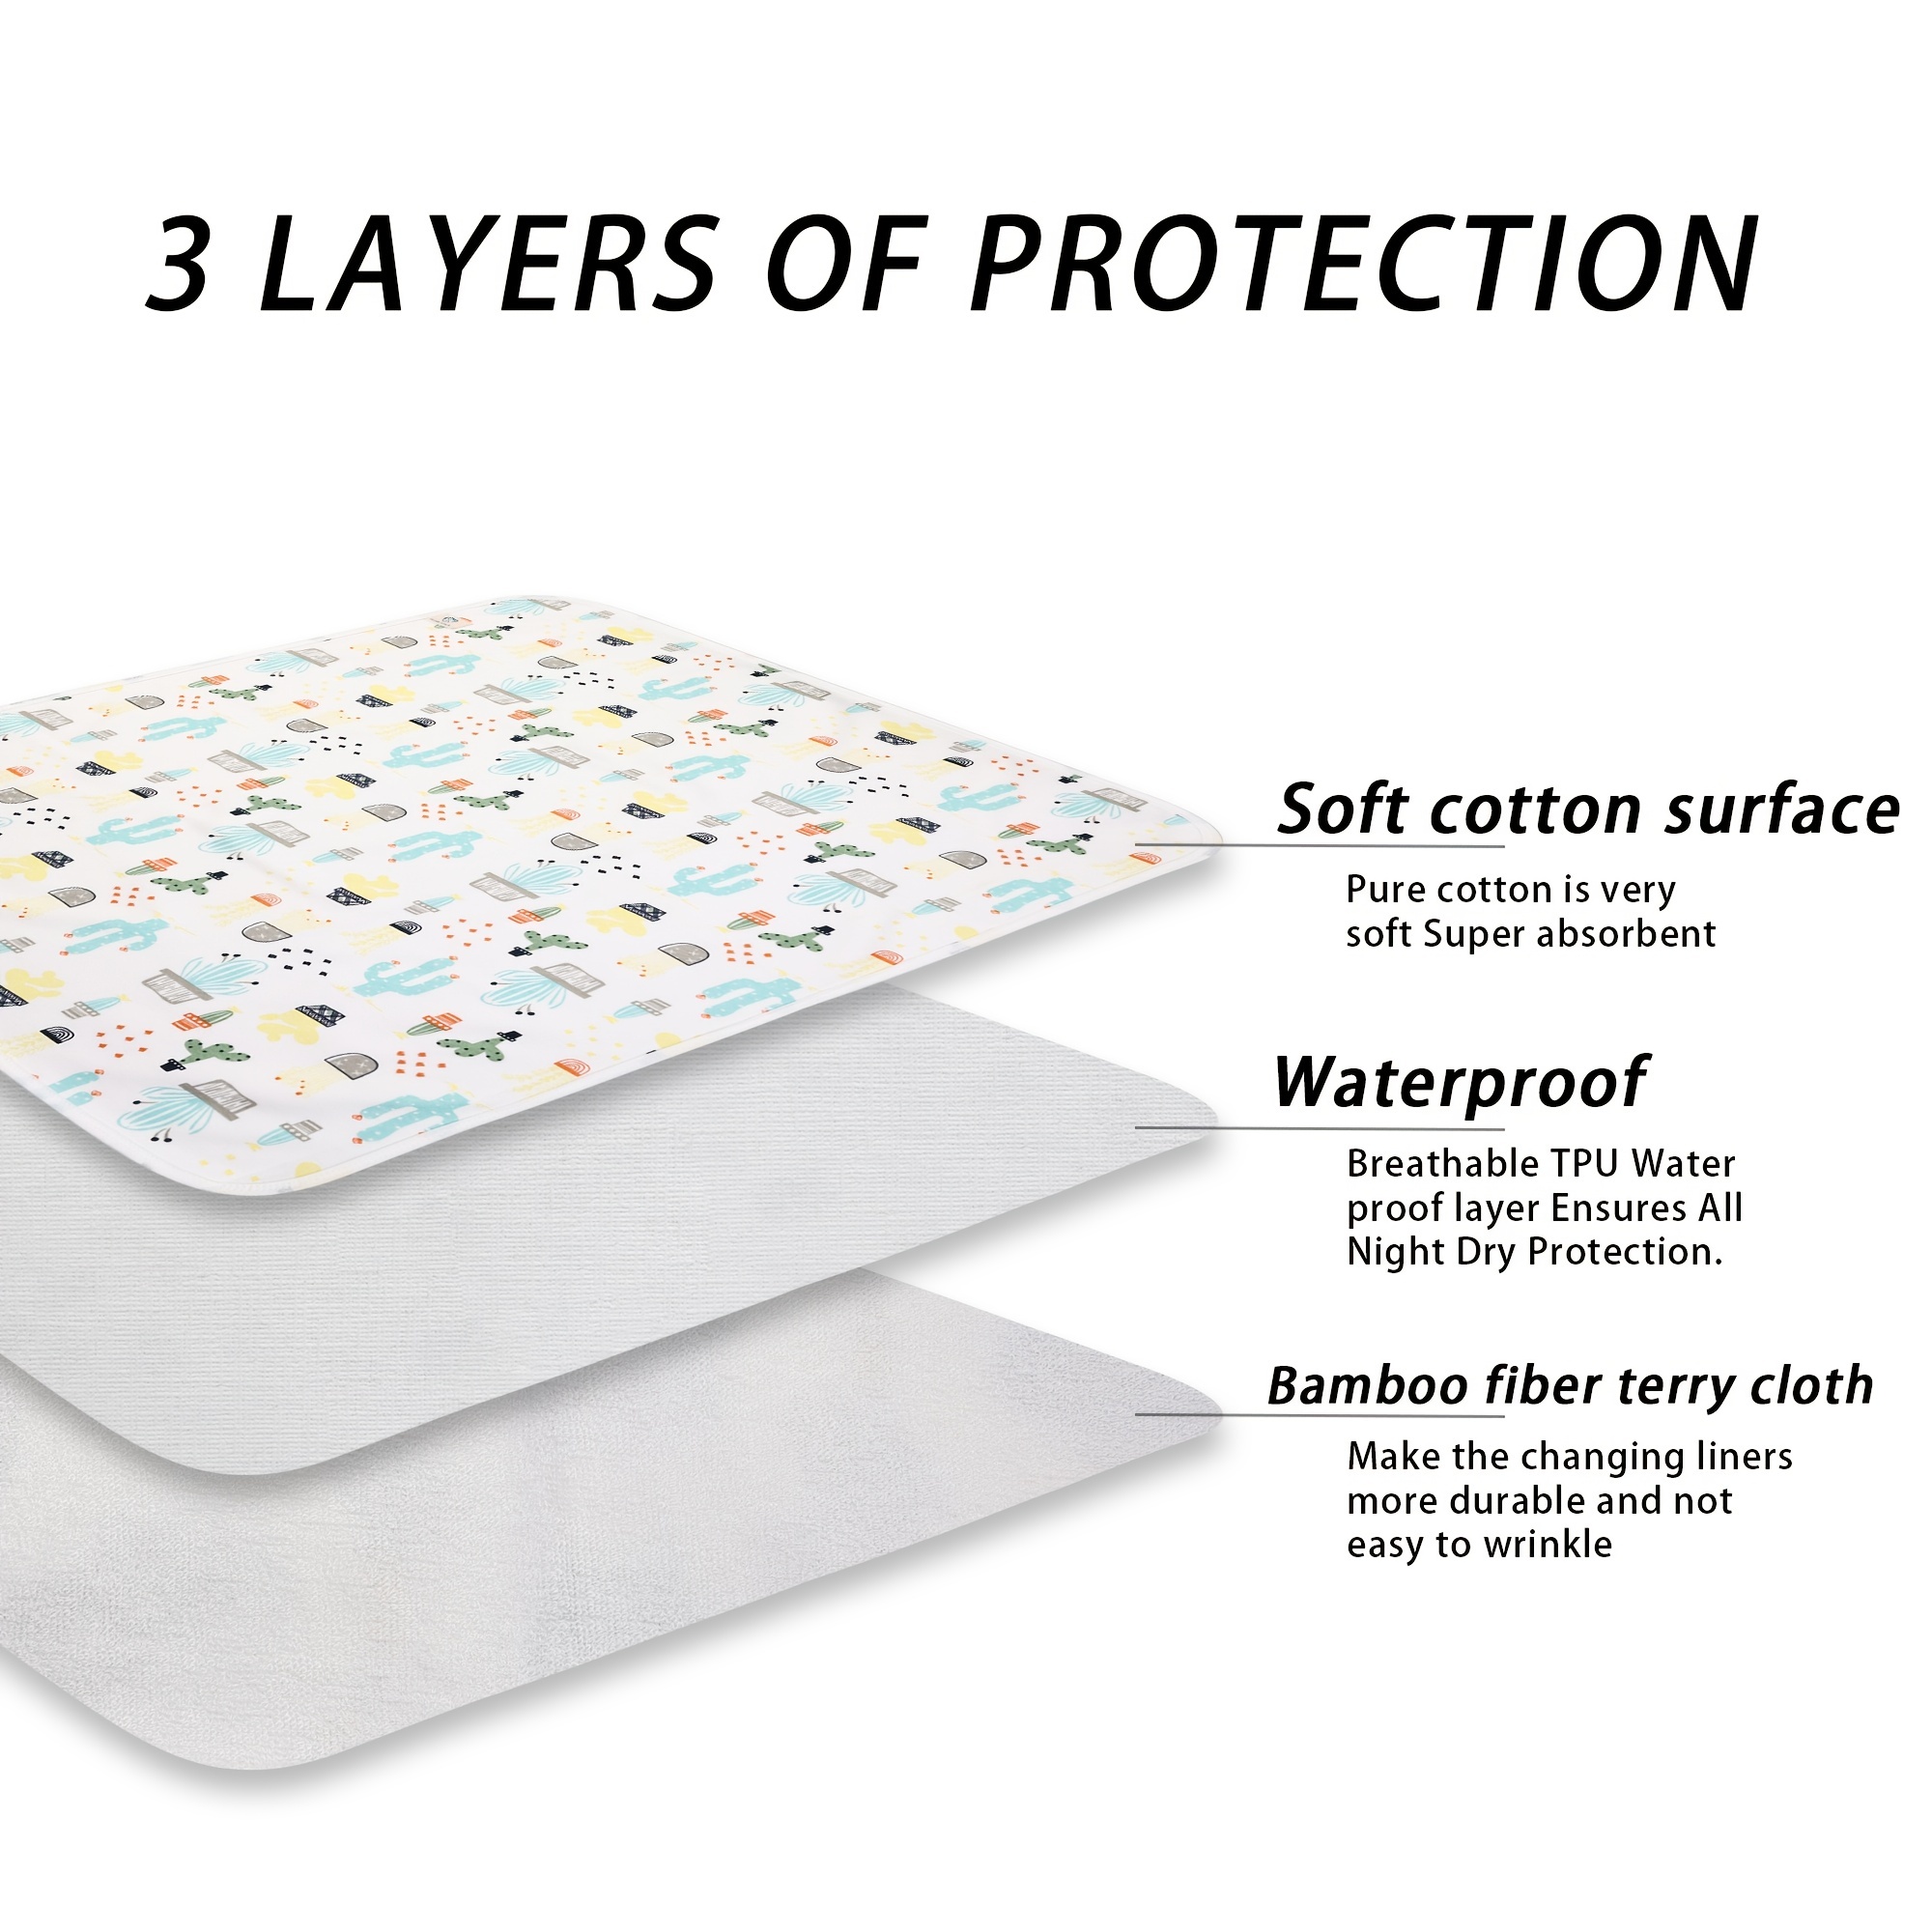 Waterproof Baby Changing Pad Changing Mat for Changing Table, Home